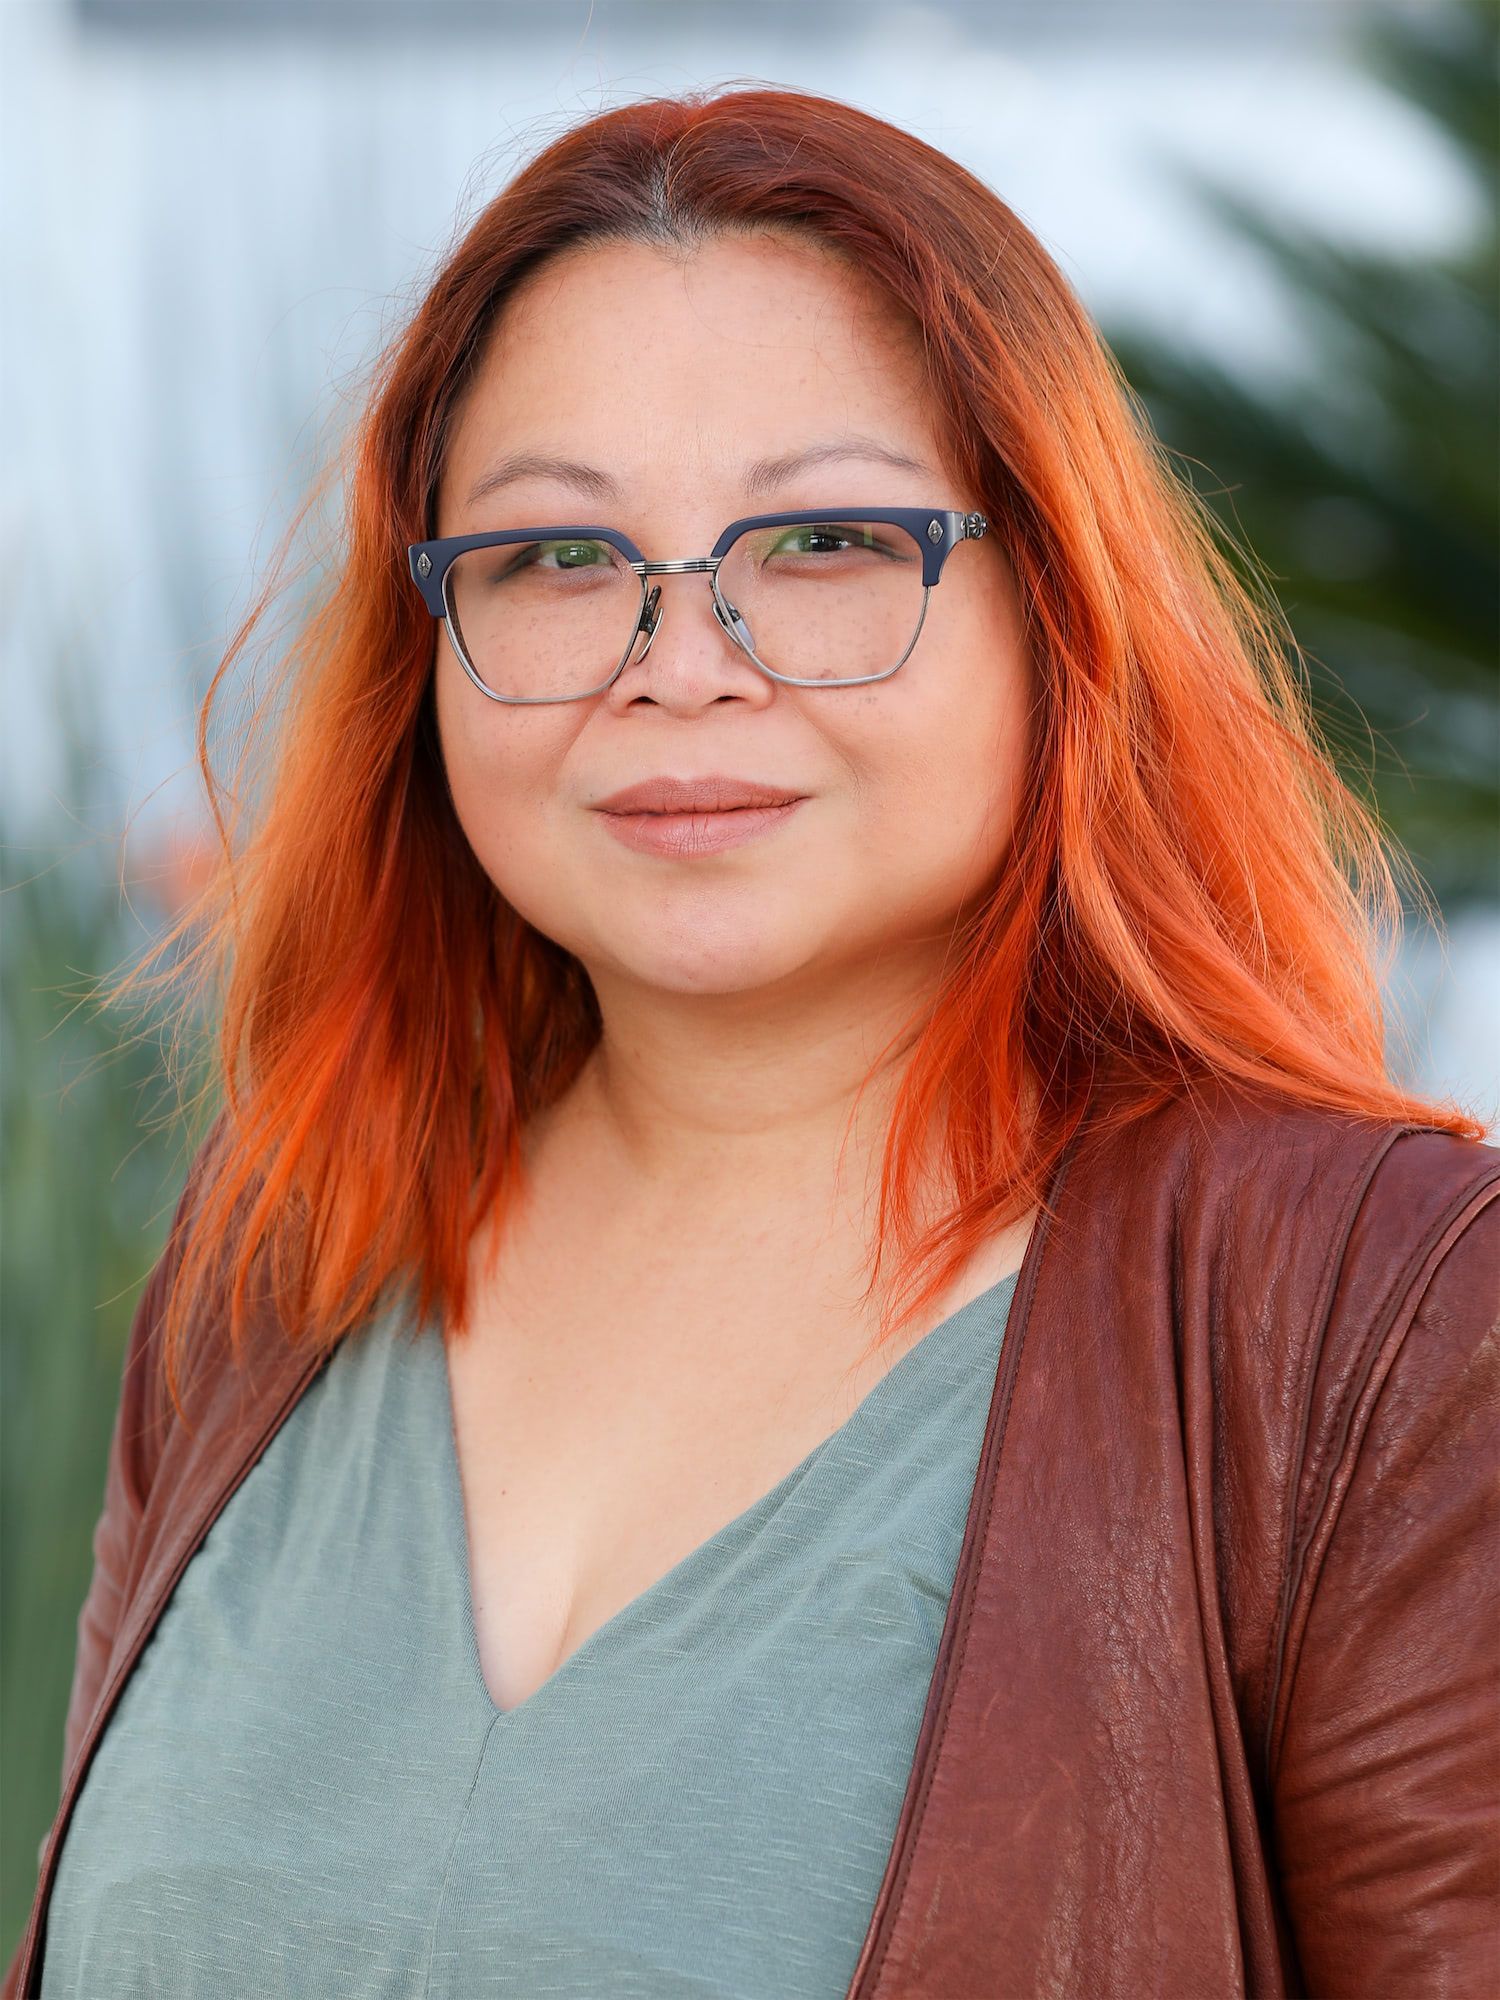 a woman with red hair and glasses is wearing a brown jacket and a green shirt .